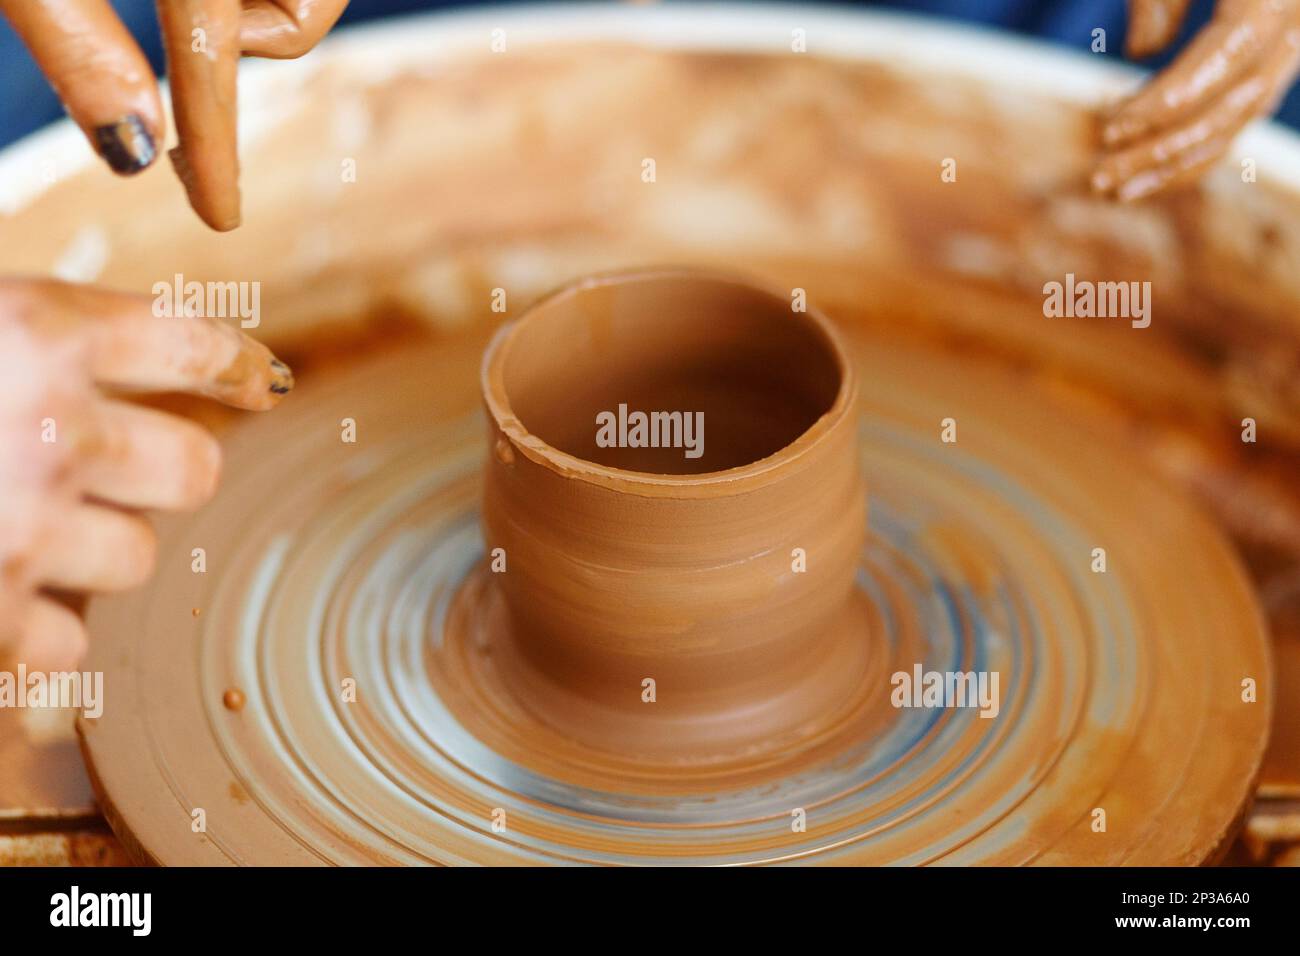 Cropped Image of hands working with Pottery Wheel, education classes Stock Photo